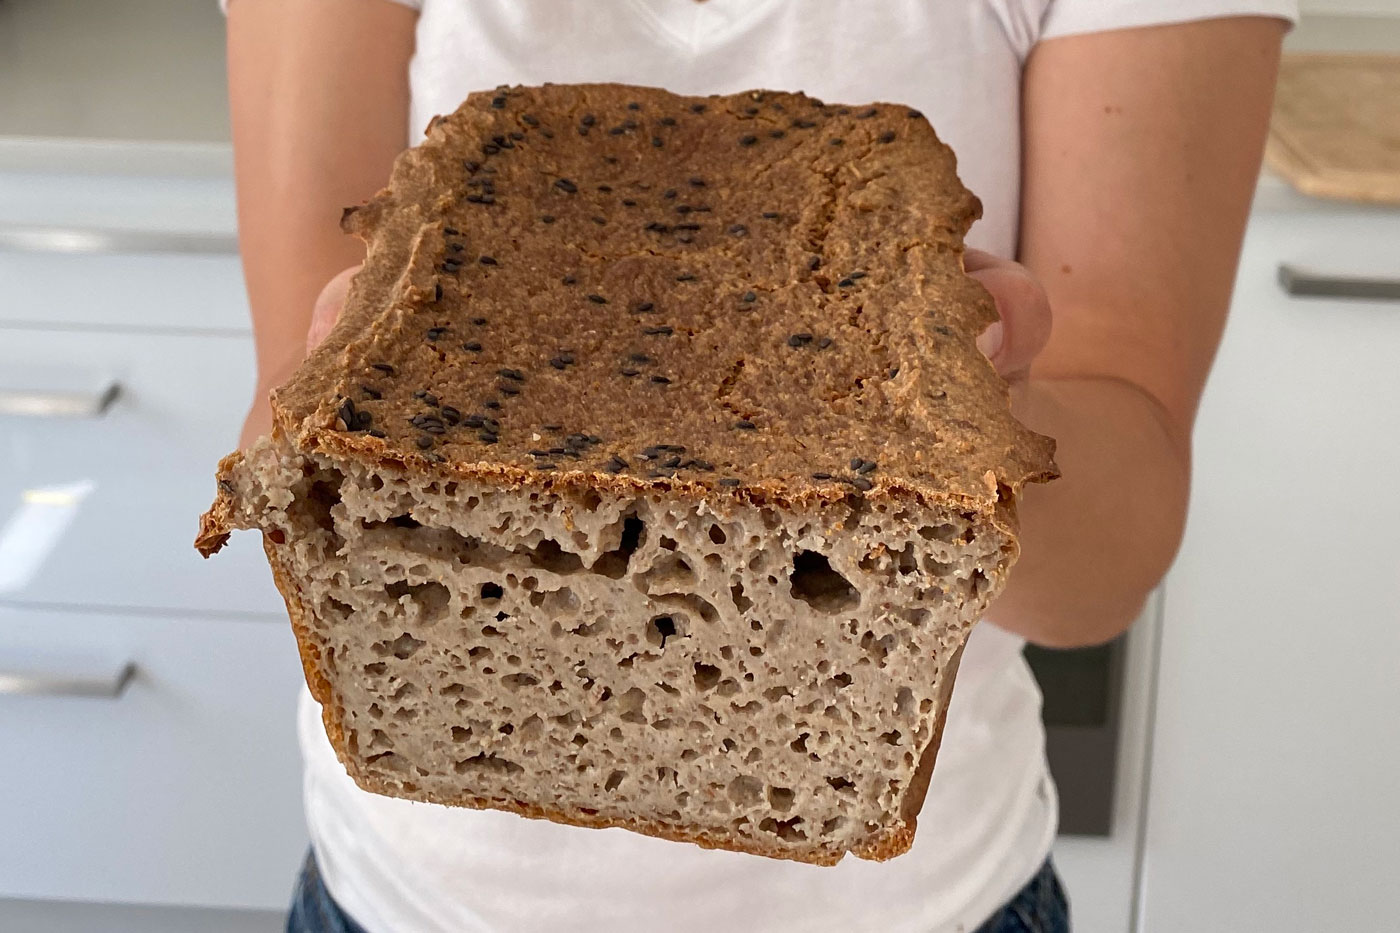 This buckwheat&quinoa bread is gluten free and yeast free